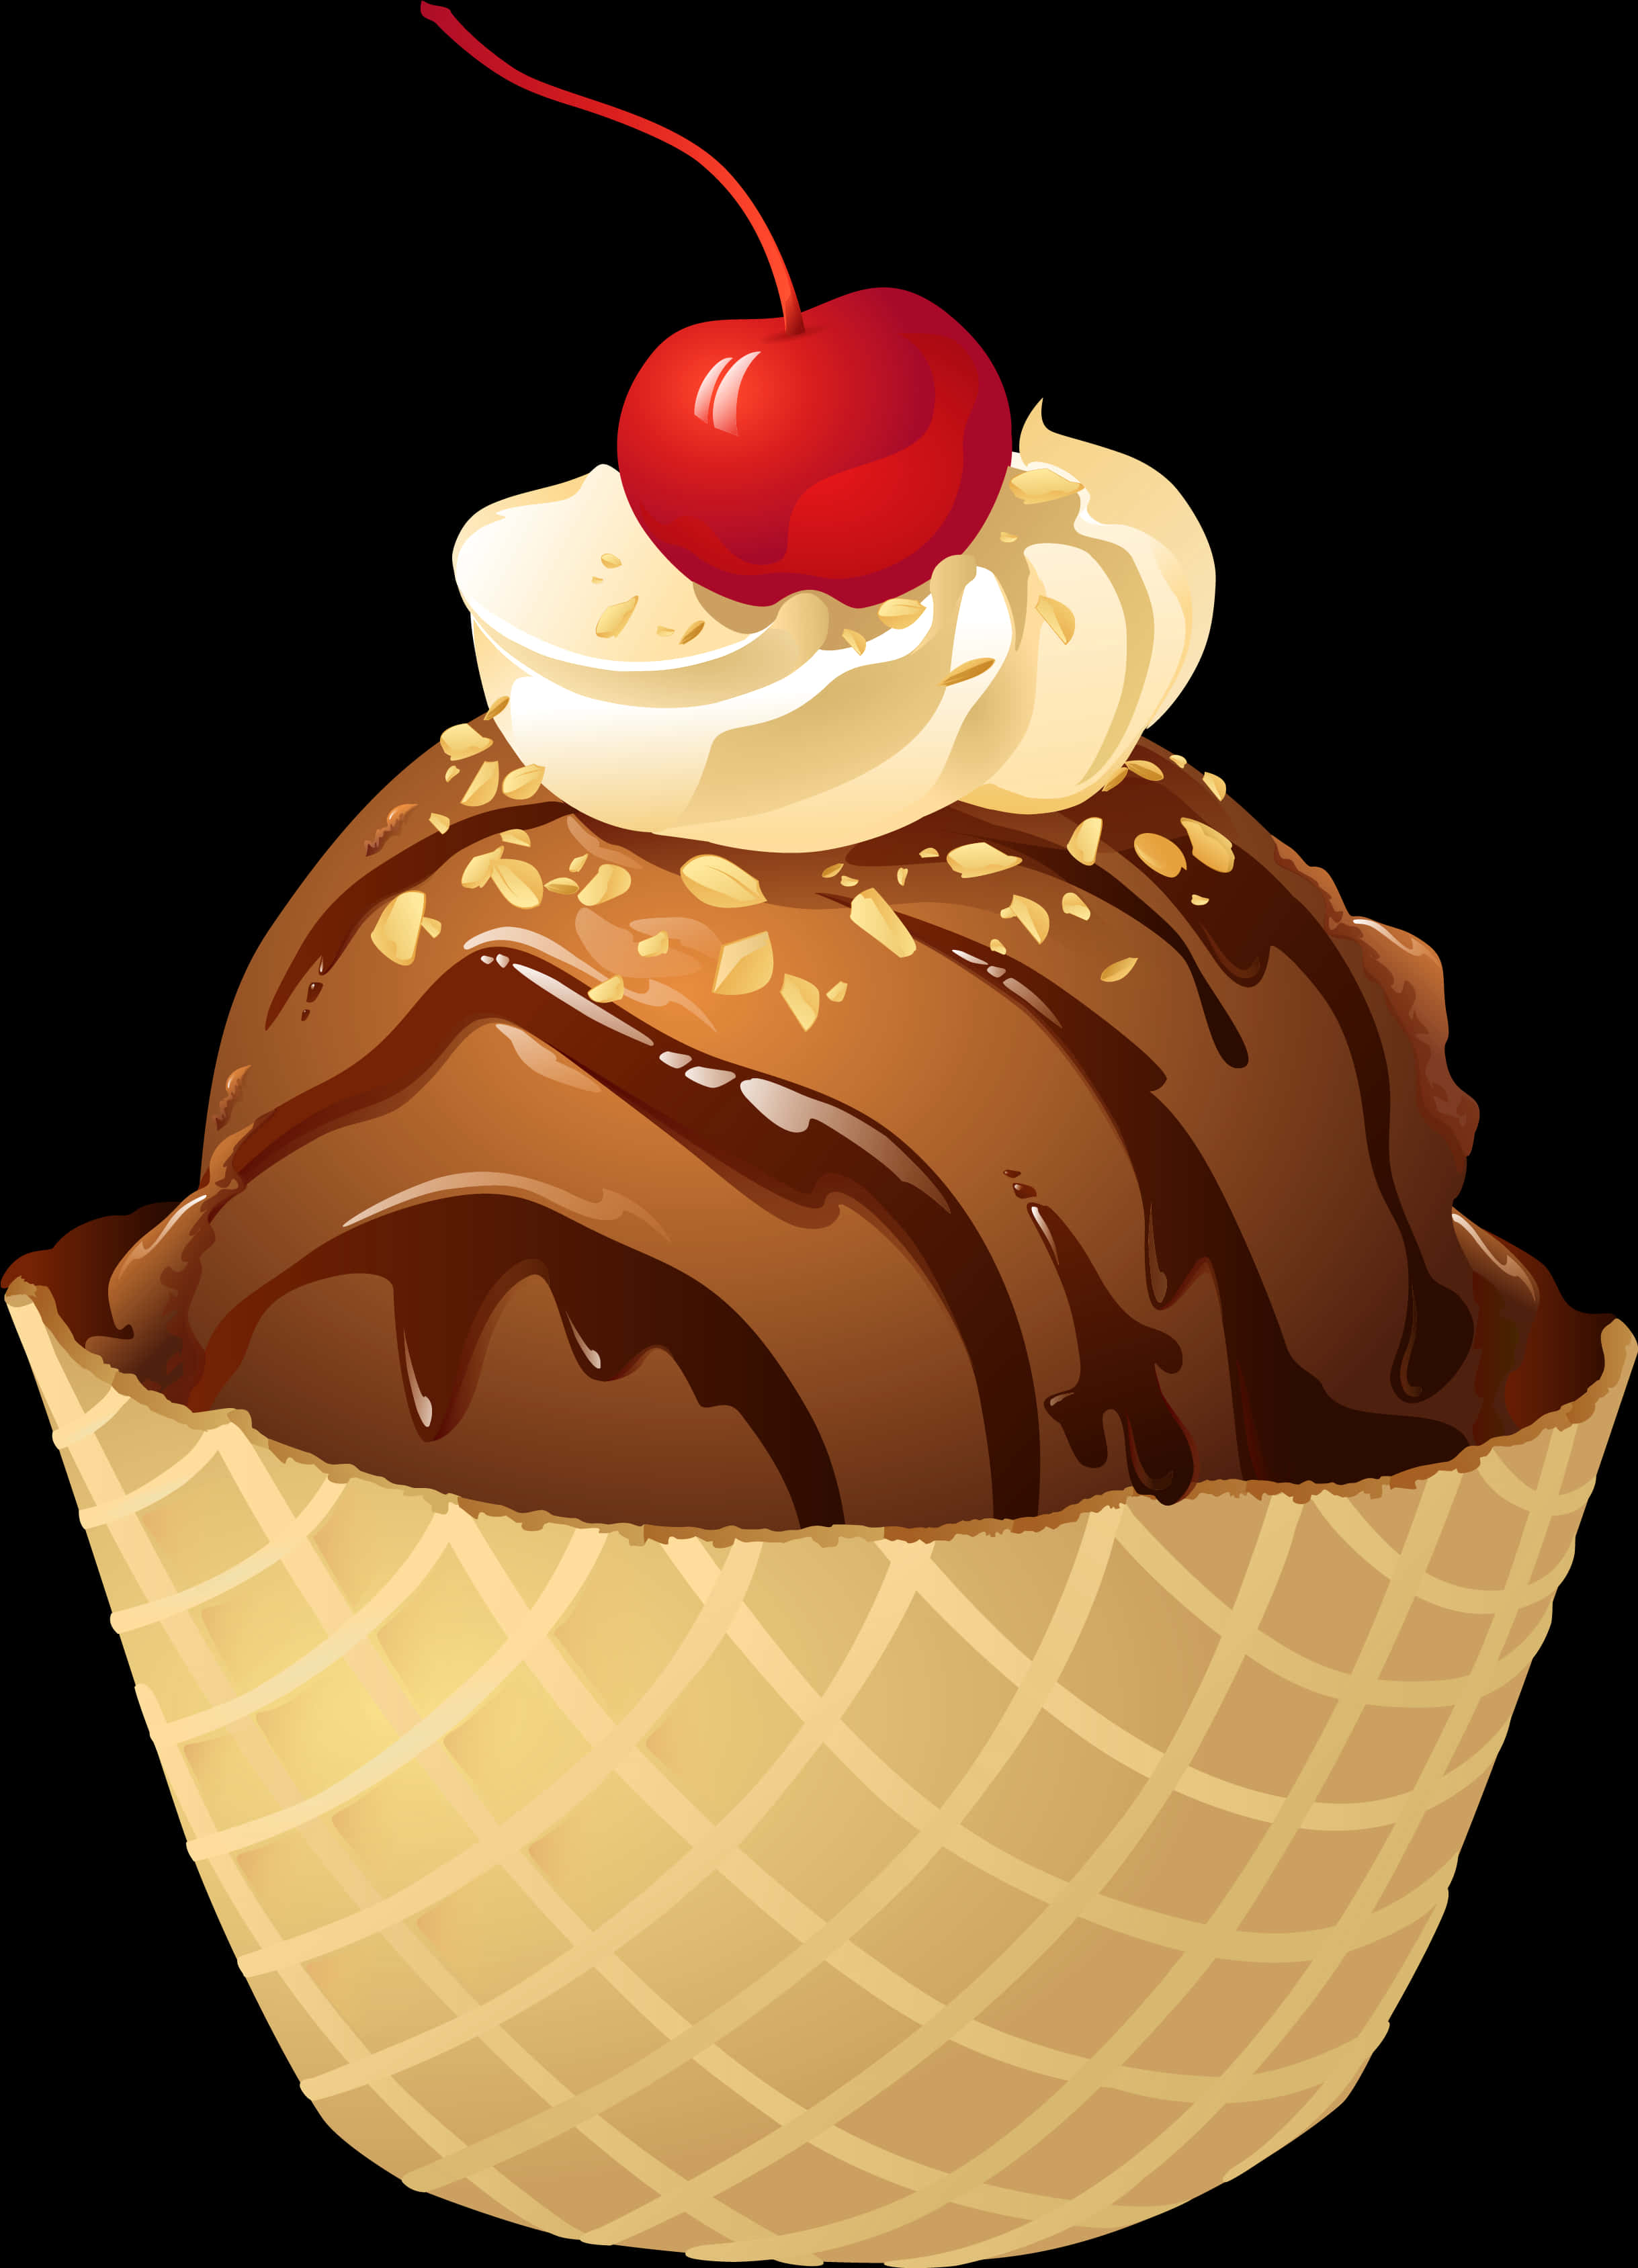 A Chocolate Ice Cream Cone With A Cherry On Top